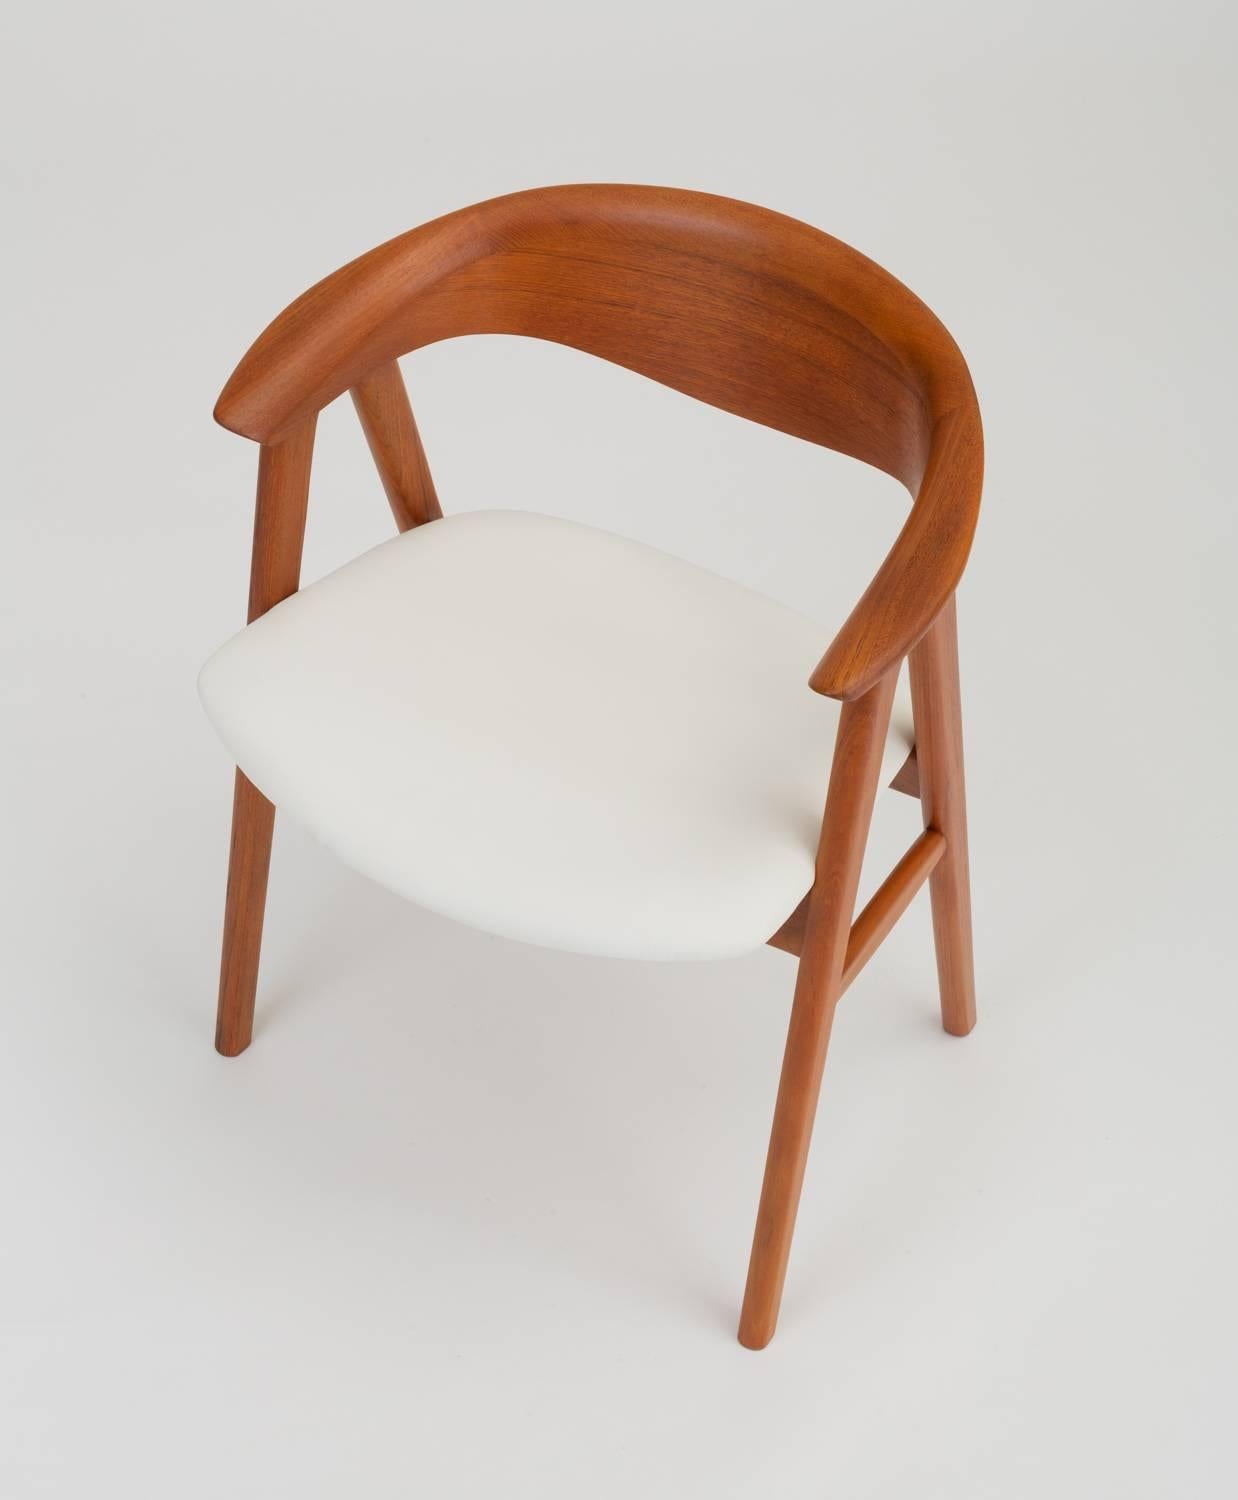 Designed in 1952 as the Model 52 armchair for Høng Stolefabrik, this example was imported to the US by Swedish-American company DUX. The chair has a generous, curved backrest with a wide lip and a broad seat cushion in white leather, supported